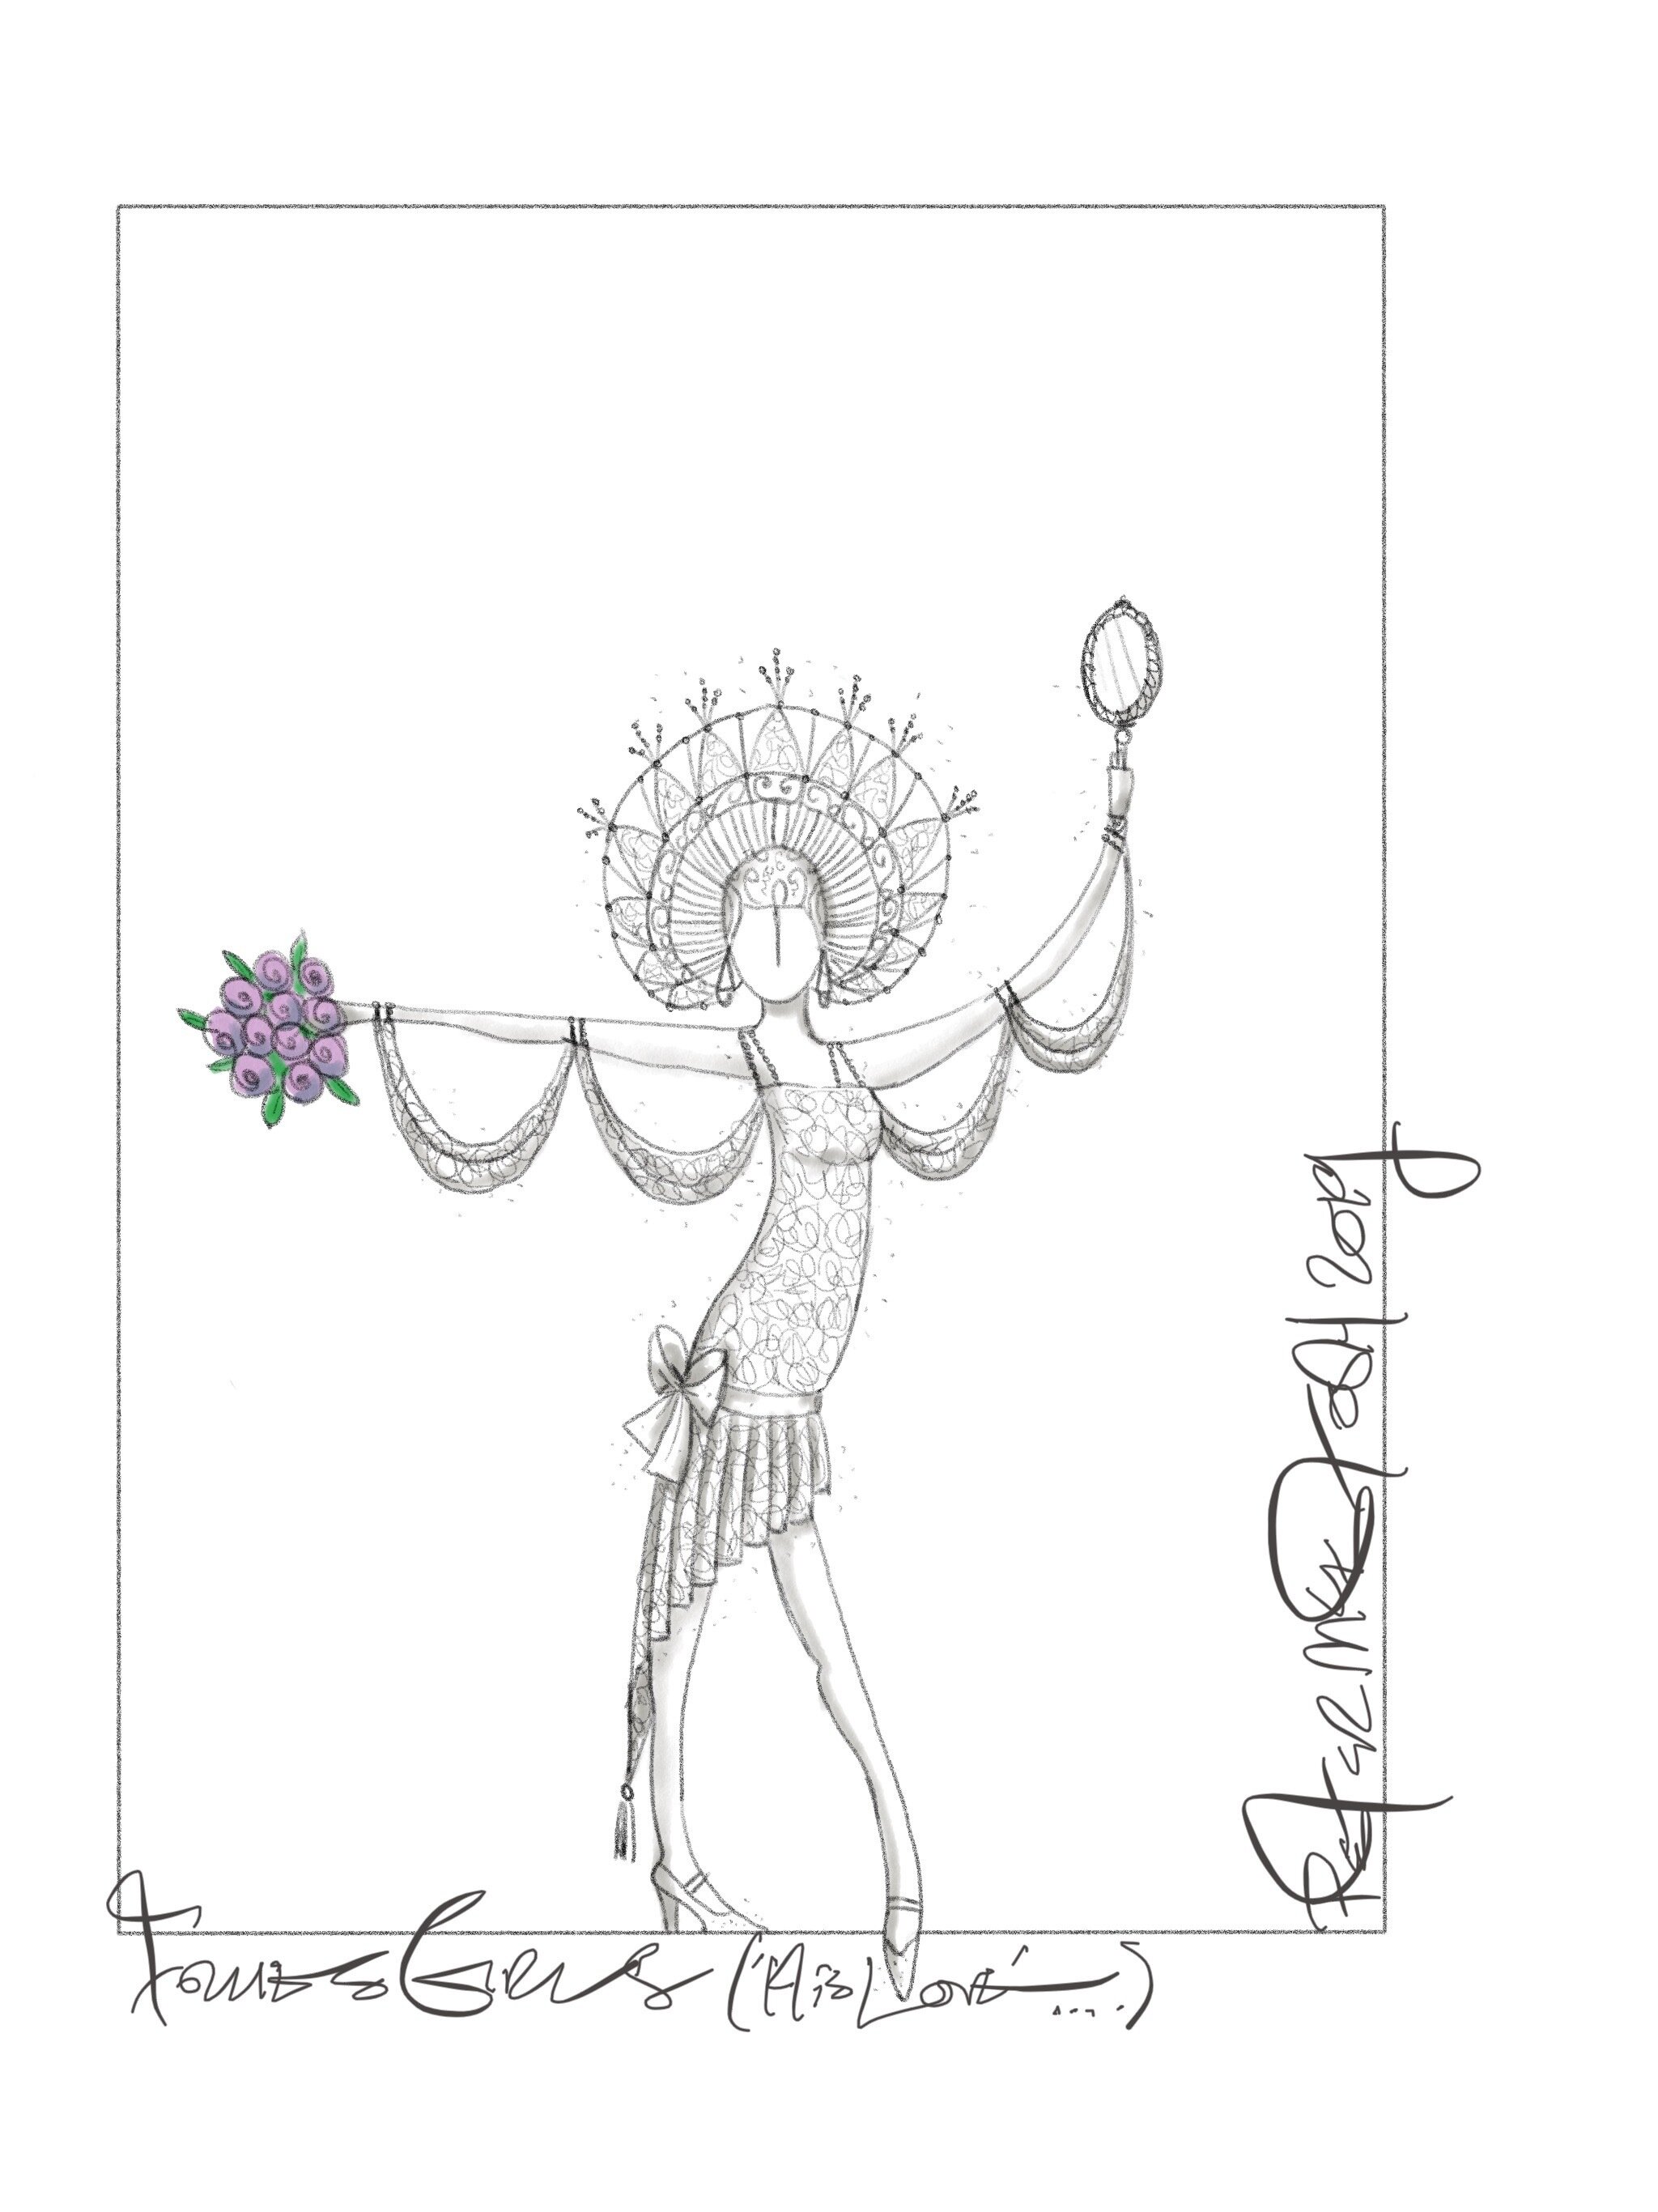 Funny Girl - costume drawing 3 (Concepts sketch).jpg